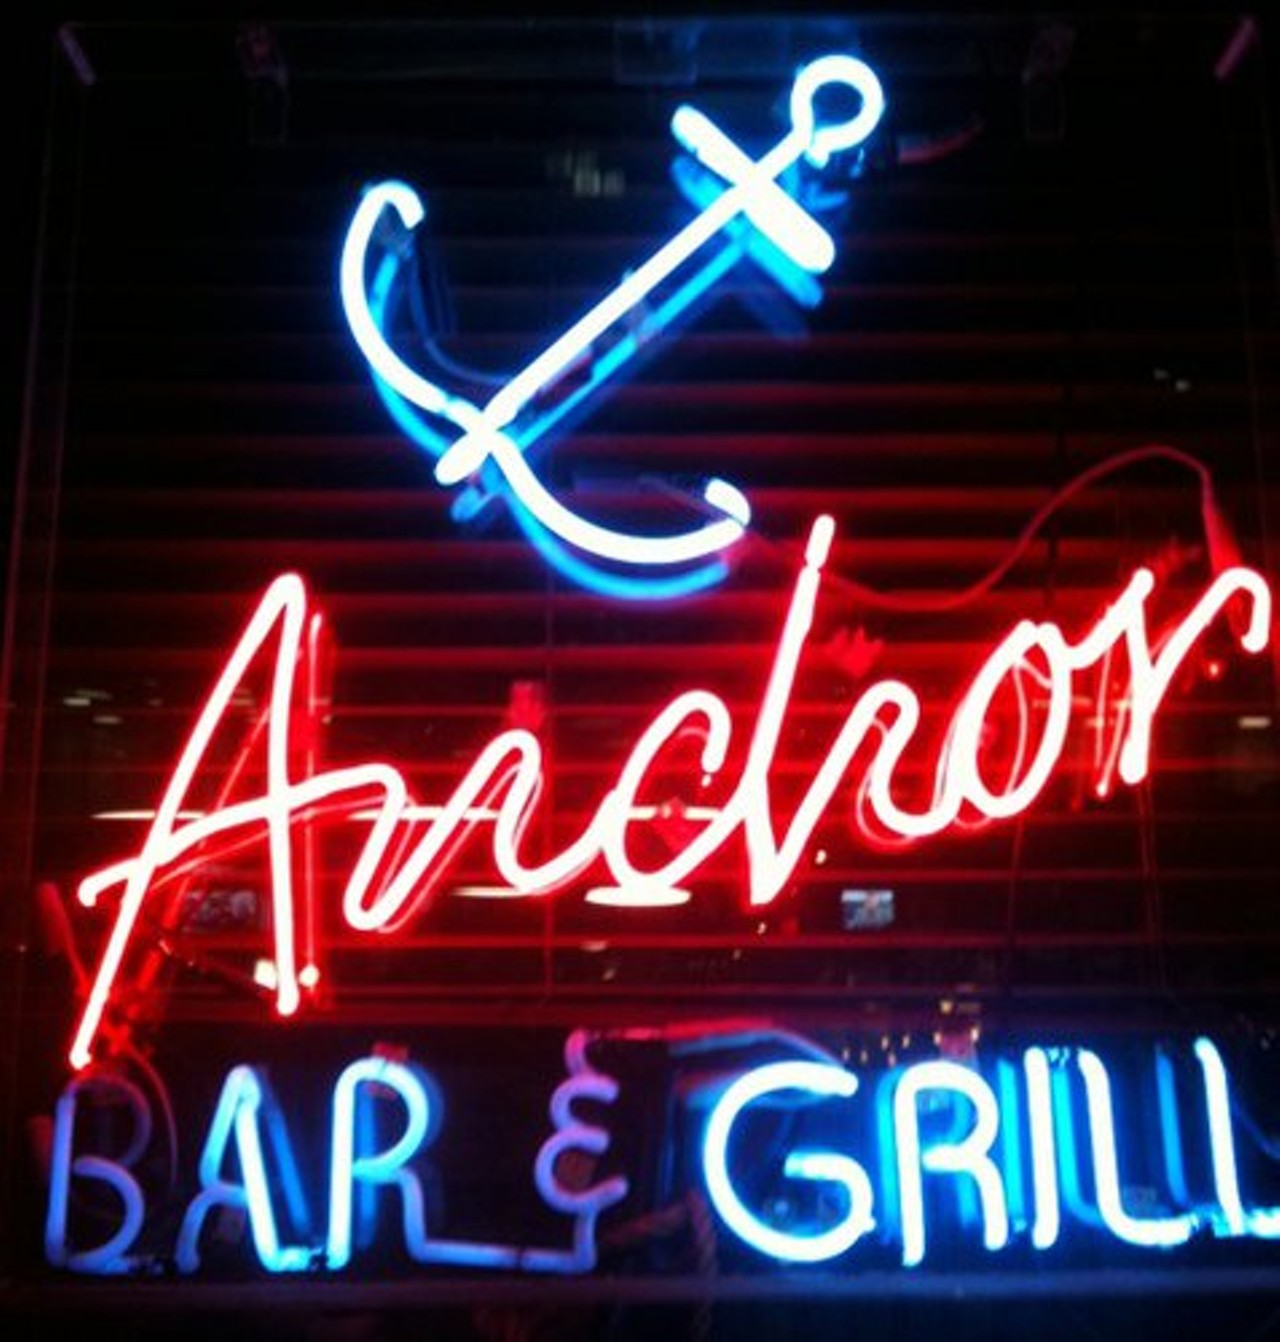 Anchor bar
This classic Detroit dive bar offers a shuttle to and from the game and cheap drinks.
Doors open at 9 a.m.; 450 Fort St W, Ste 100, Detroit; 313-964-9127; no cover.
Photo via Facebook.